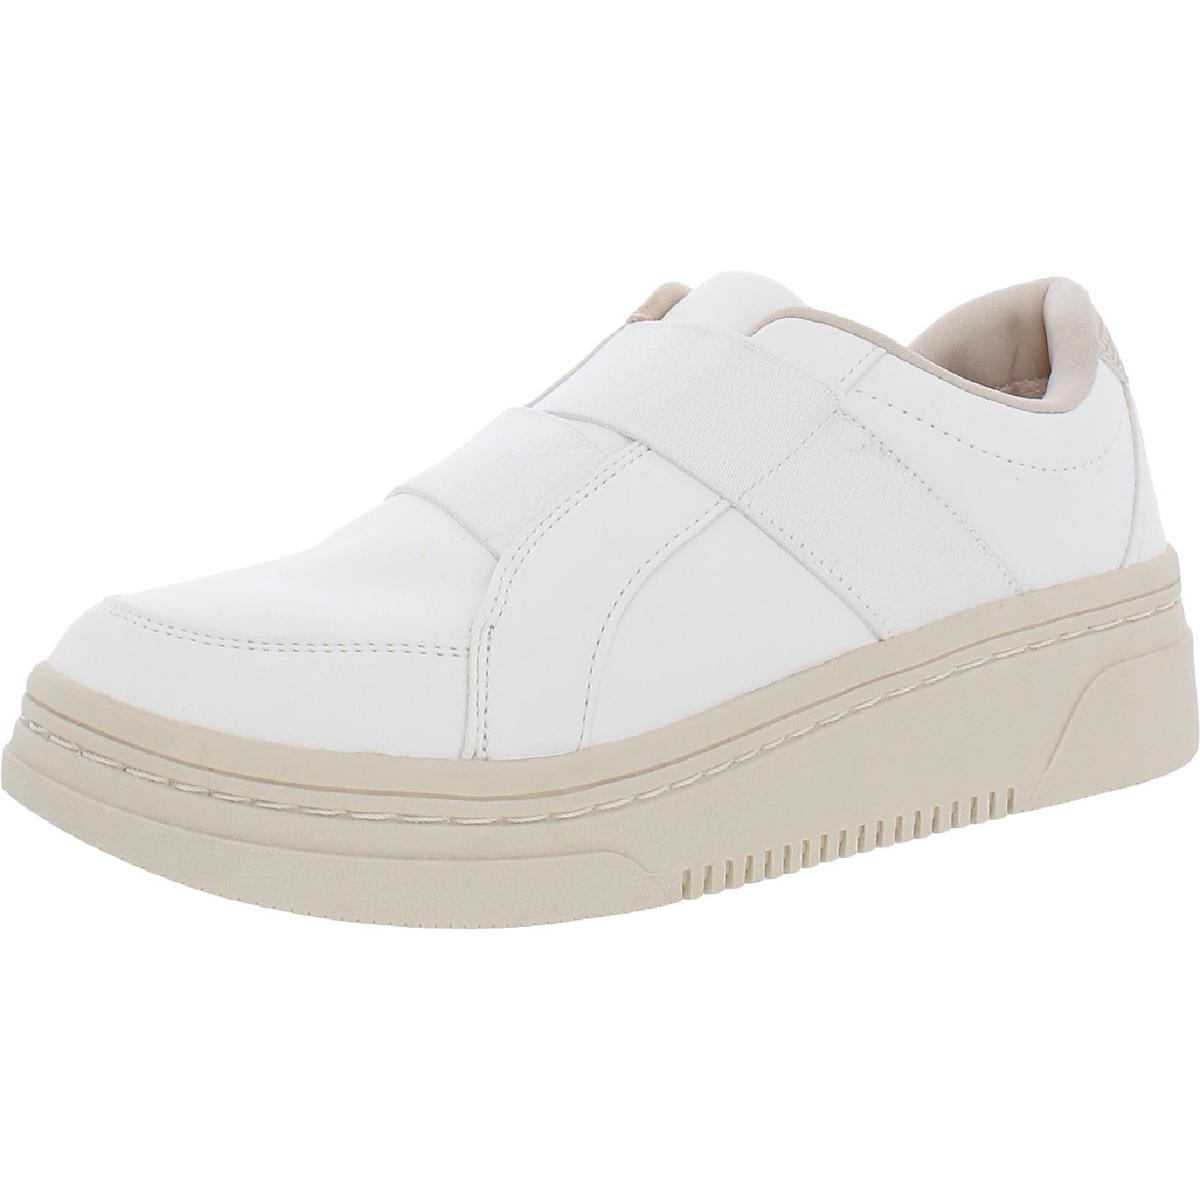 Dr. Scholl's Empower Womens Comfort Insole Casual and Fashion Sneakers